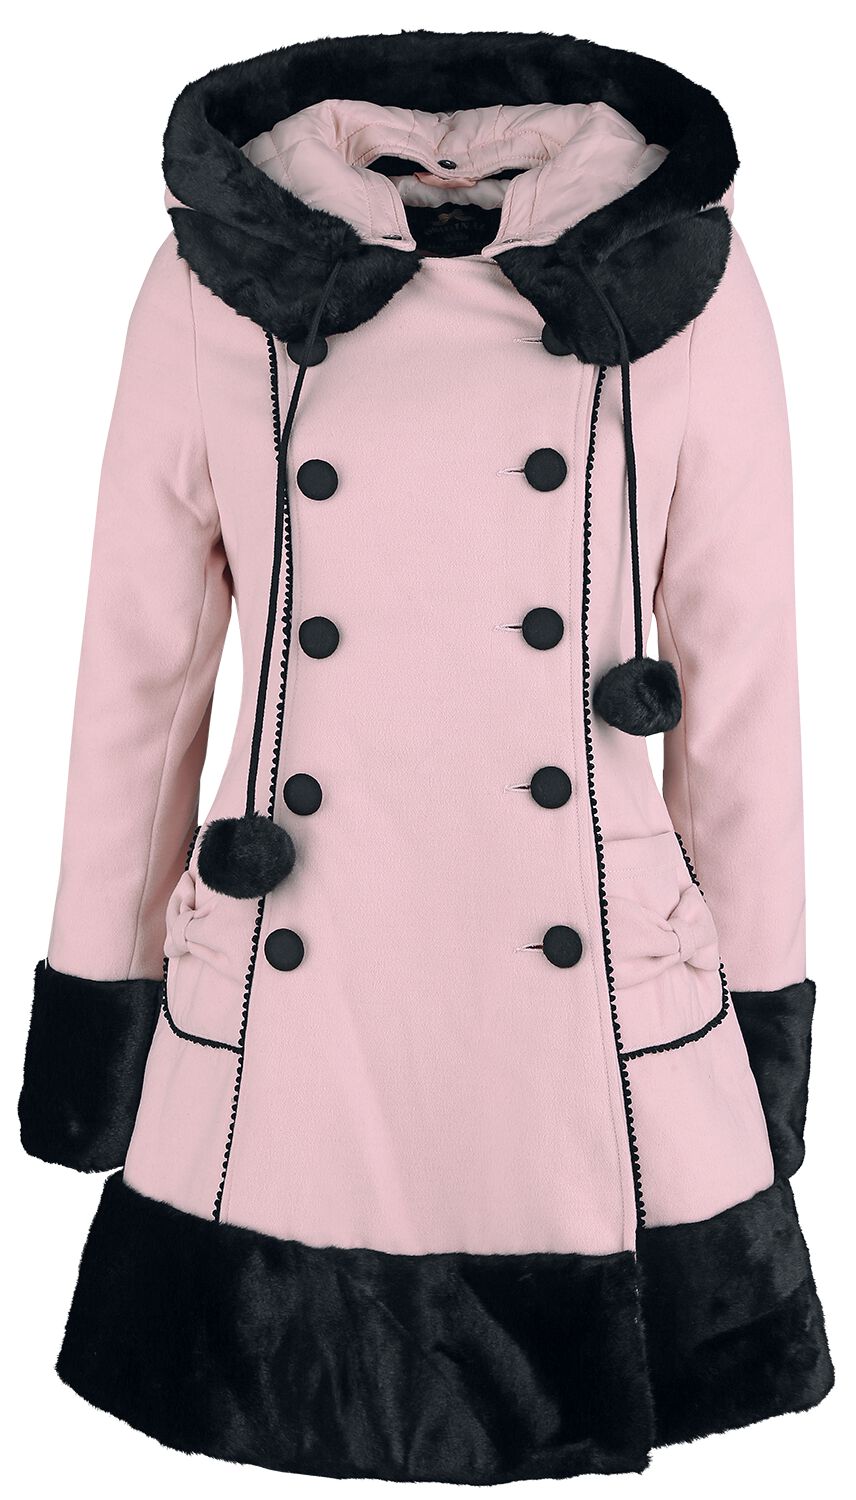 Image of Cappotto invernale Rockabilly di Hell Bunny - Sarah Jane Coat - XS a 4XL - Donna - rosa pallido